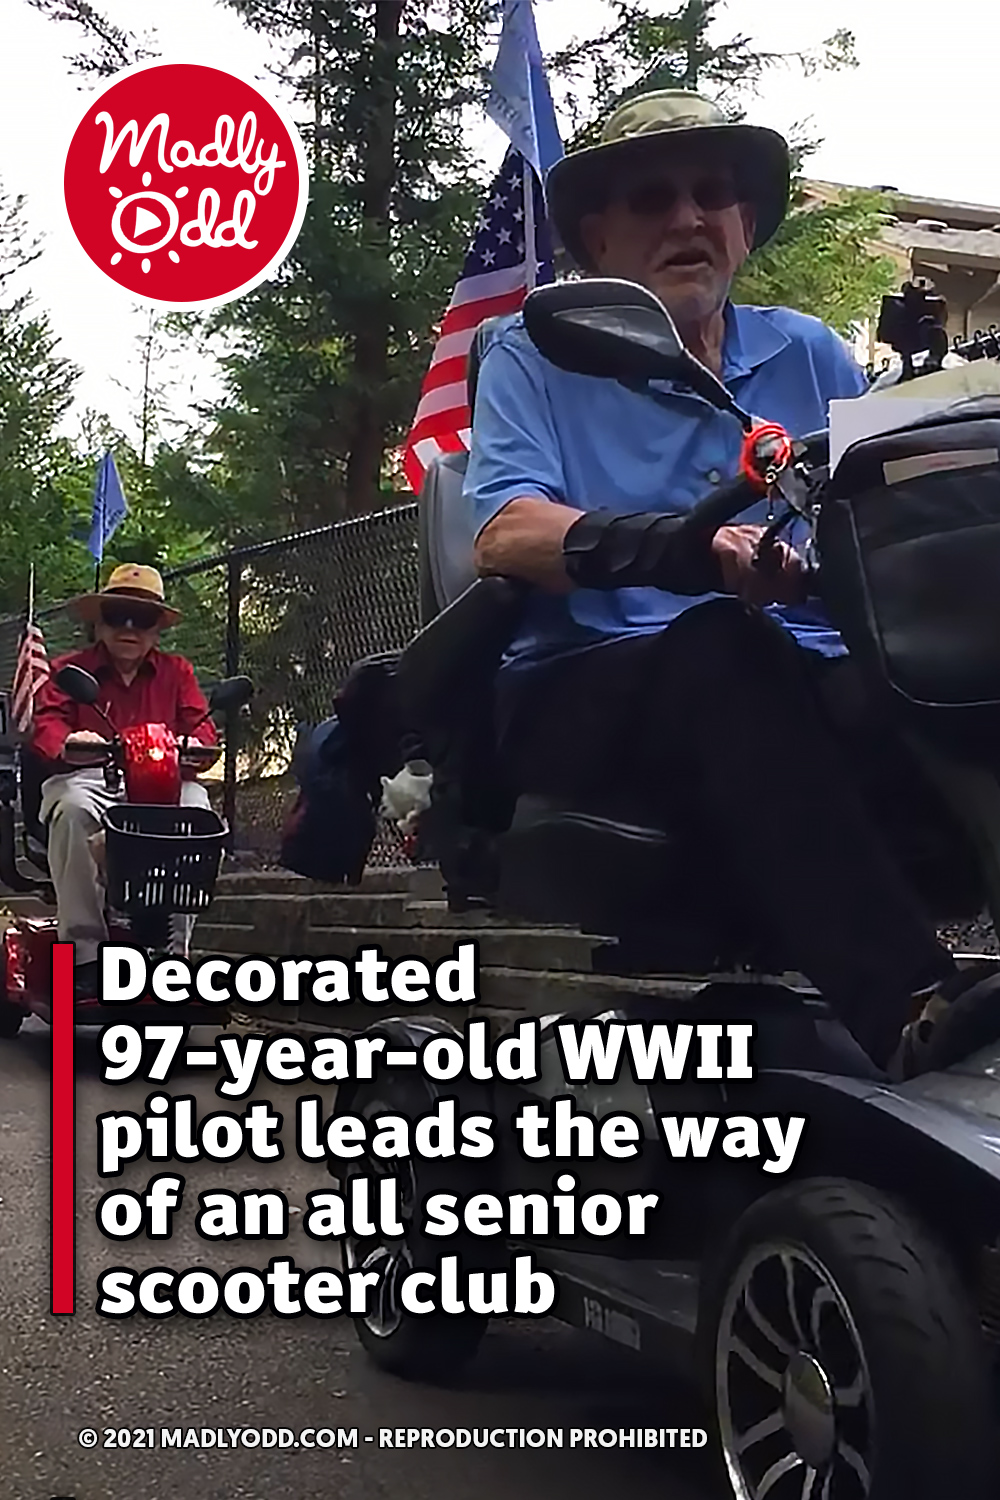 Decorated 97-year-old WWII pilot leads the way of an all senior scooter club